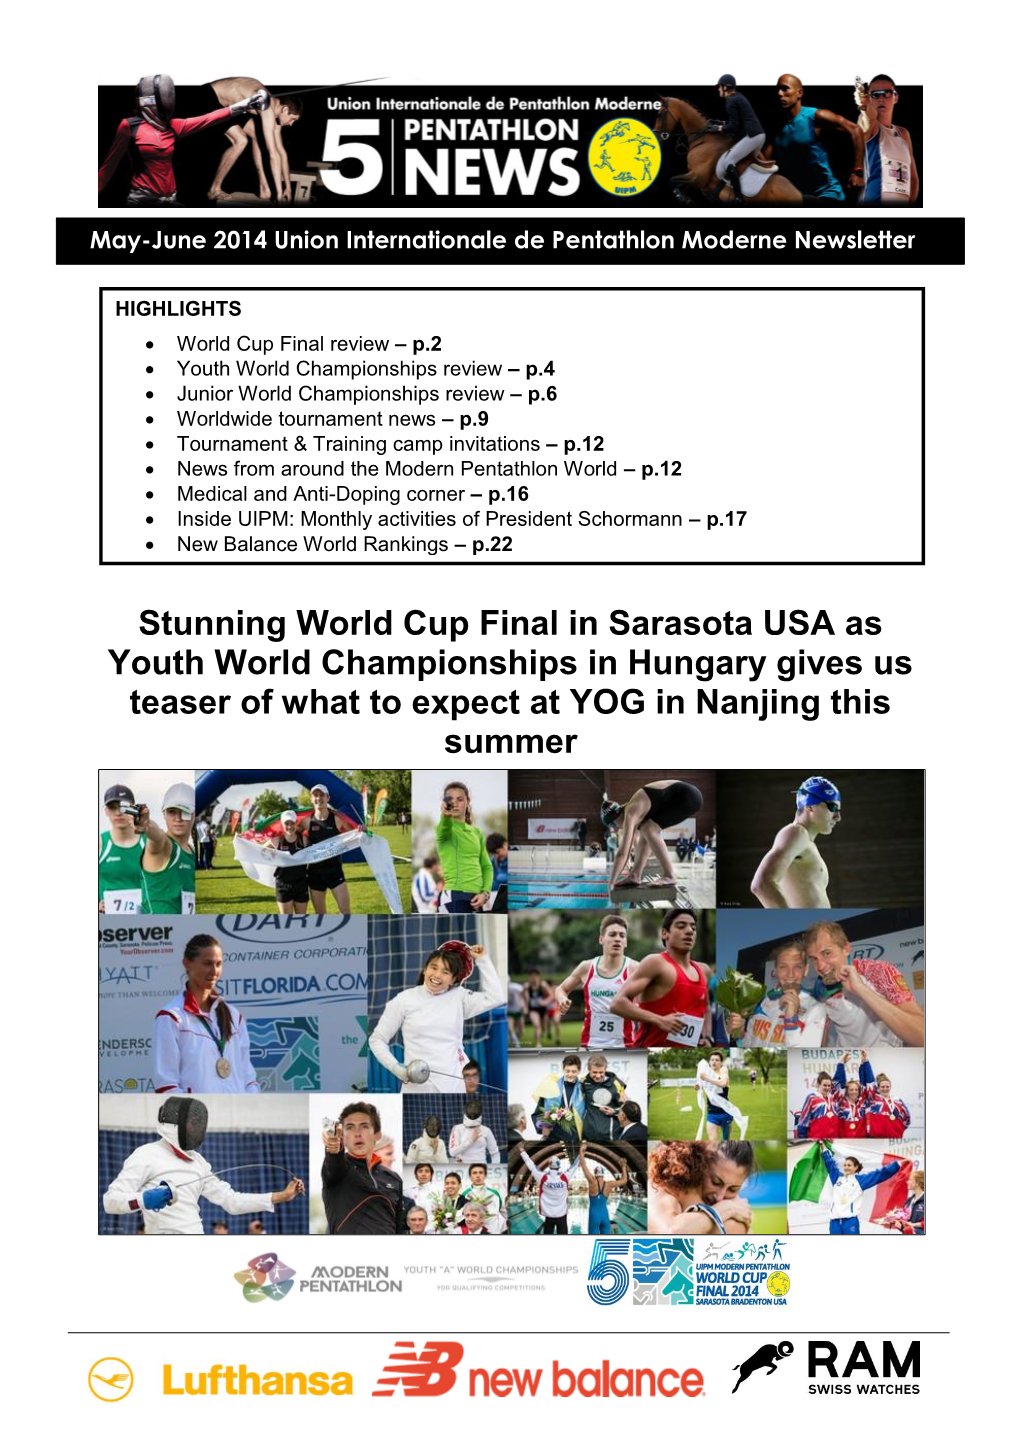 Stunning World Cup Final in Sarasota USA As Youth World Championships in Hungary Gives Us Teaser of What to Expect at YOG in Nanjing This Summer